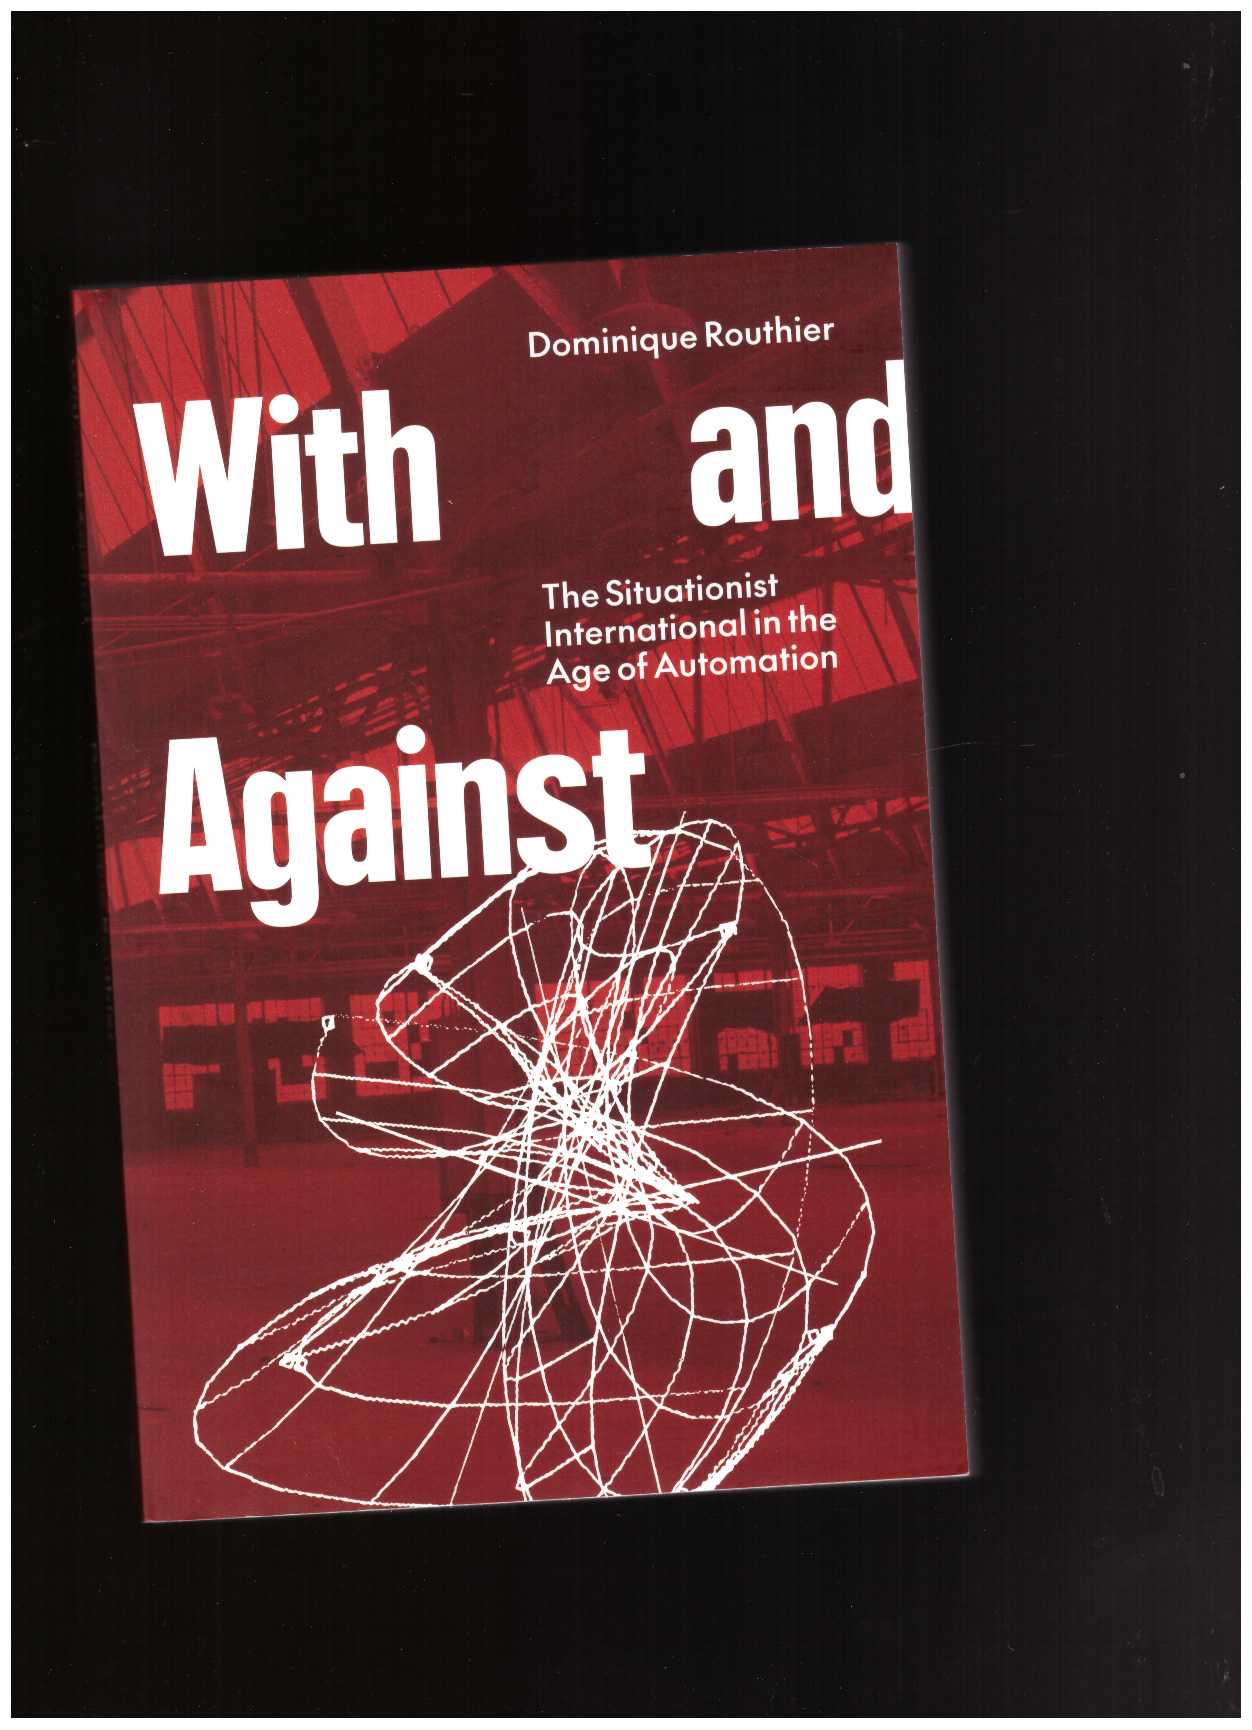 ROUTHIER, Dominique - With and Against: the Situationist International in the Age of Automation